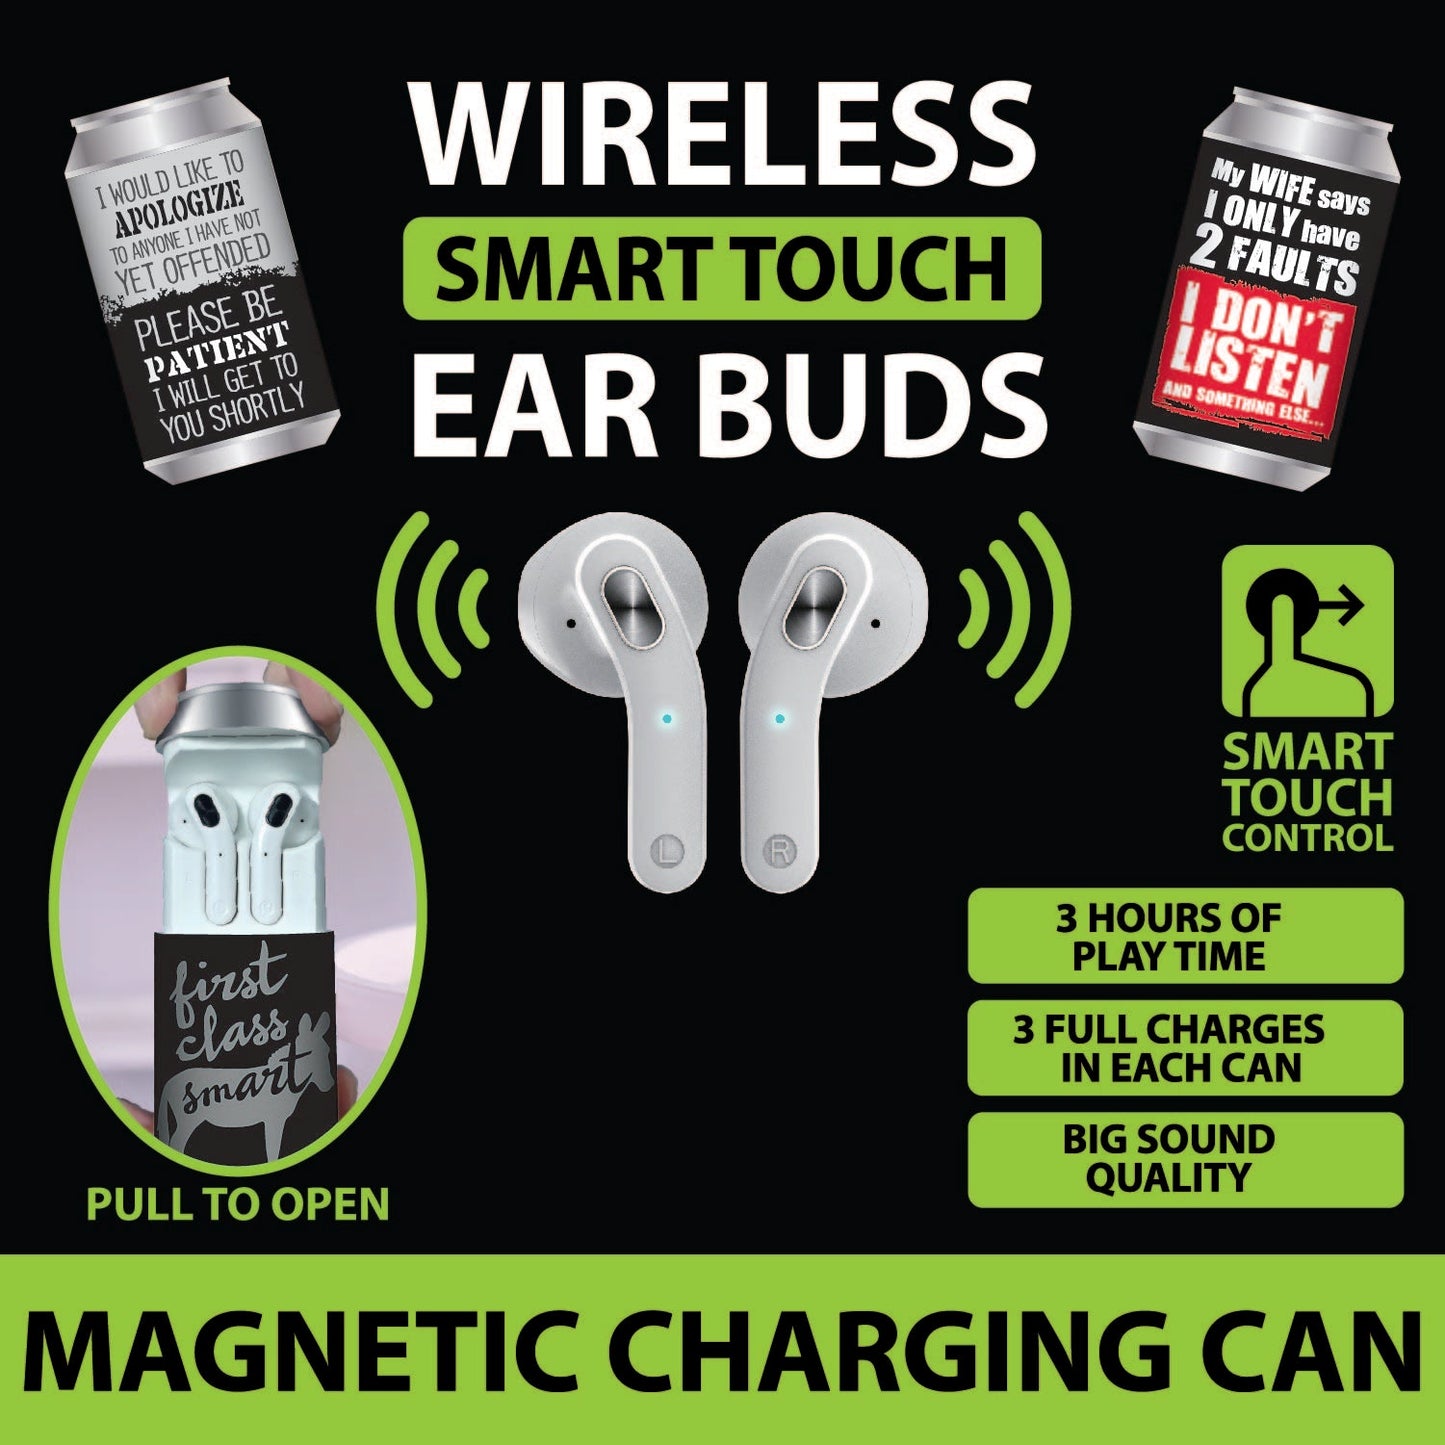 ITEM NUMBER 022718 TRULY WIRELESS EARBUDS AND CHARGING CAN 6 PIECES PER DISPLAY